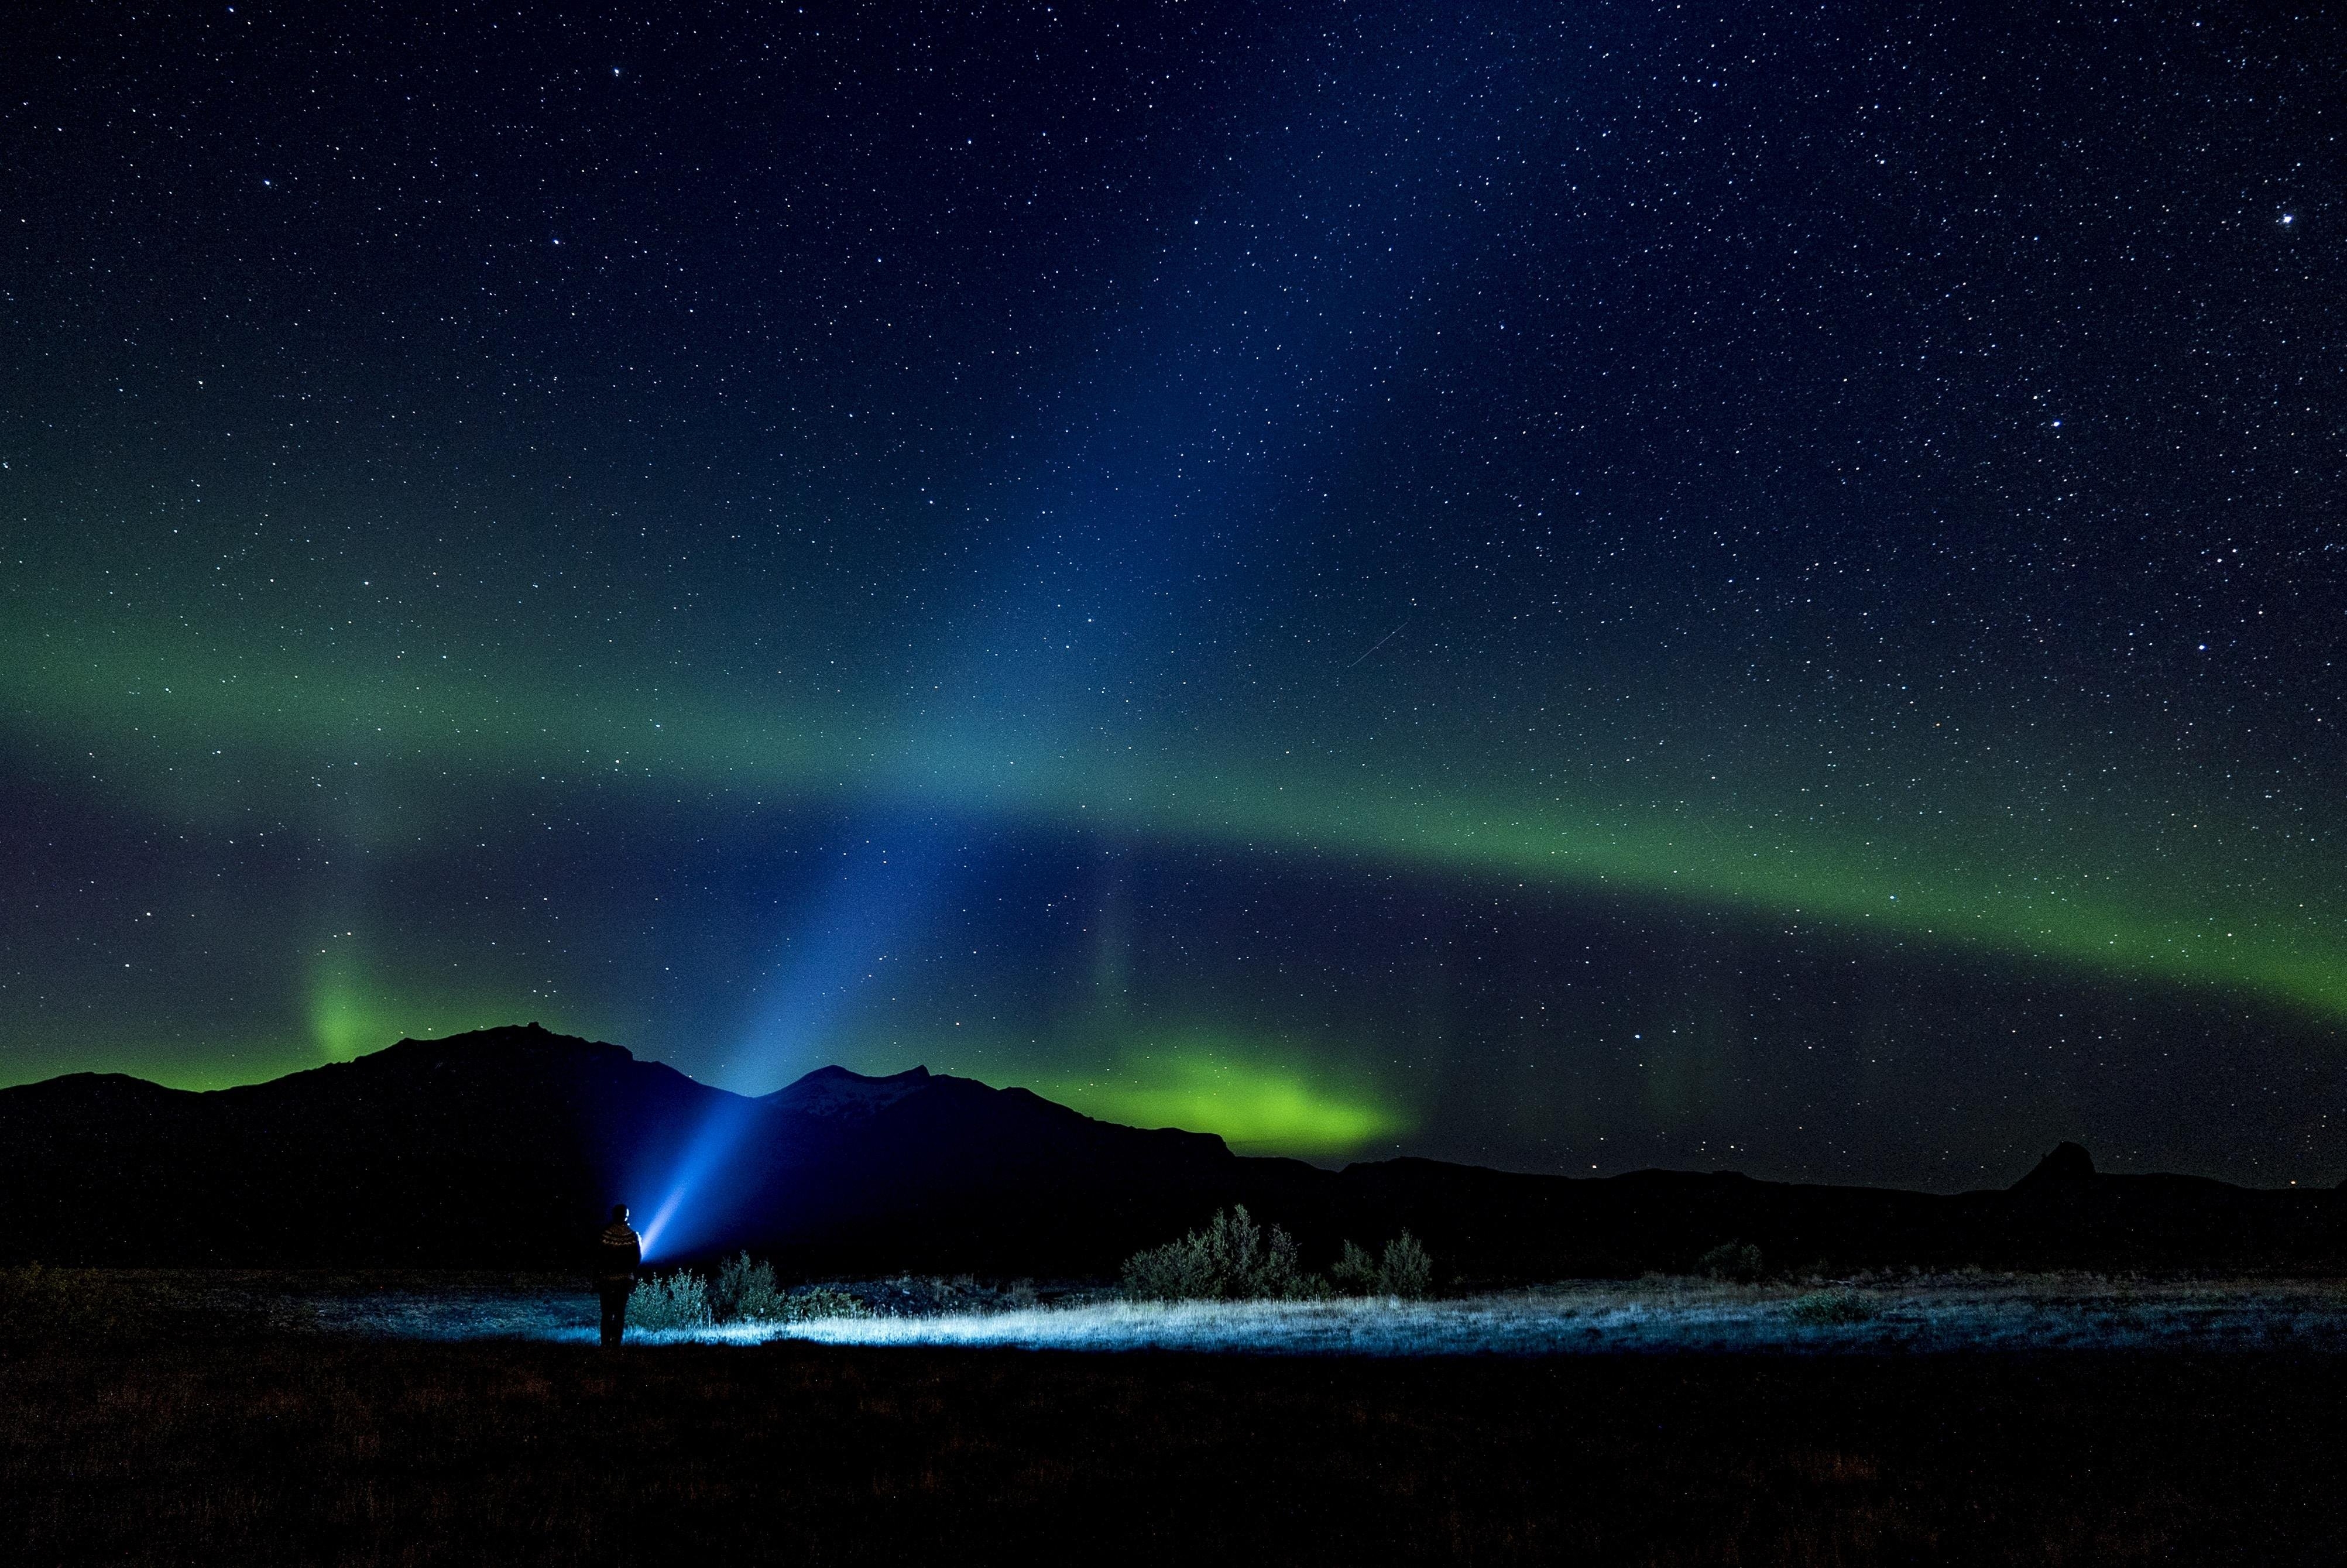 Aurora Night 4k Wallpaper Hd Nature 4k Wallpapers Images Photos And